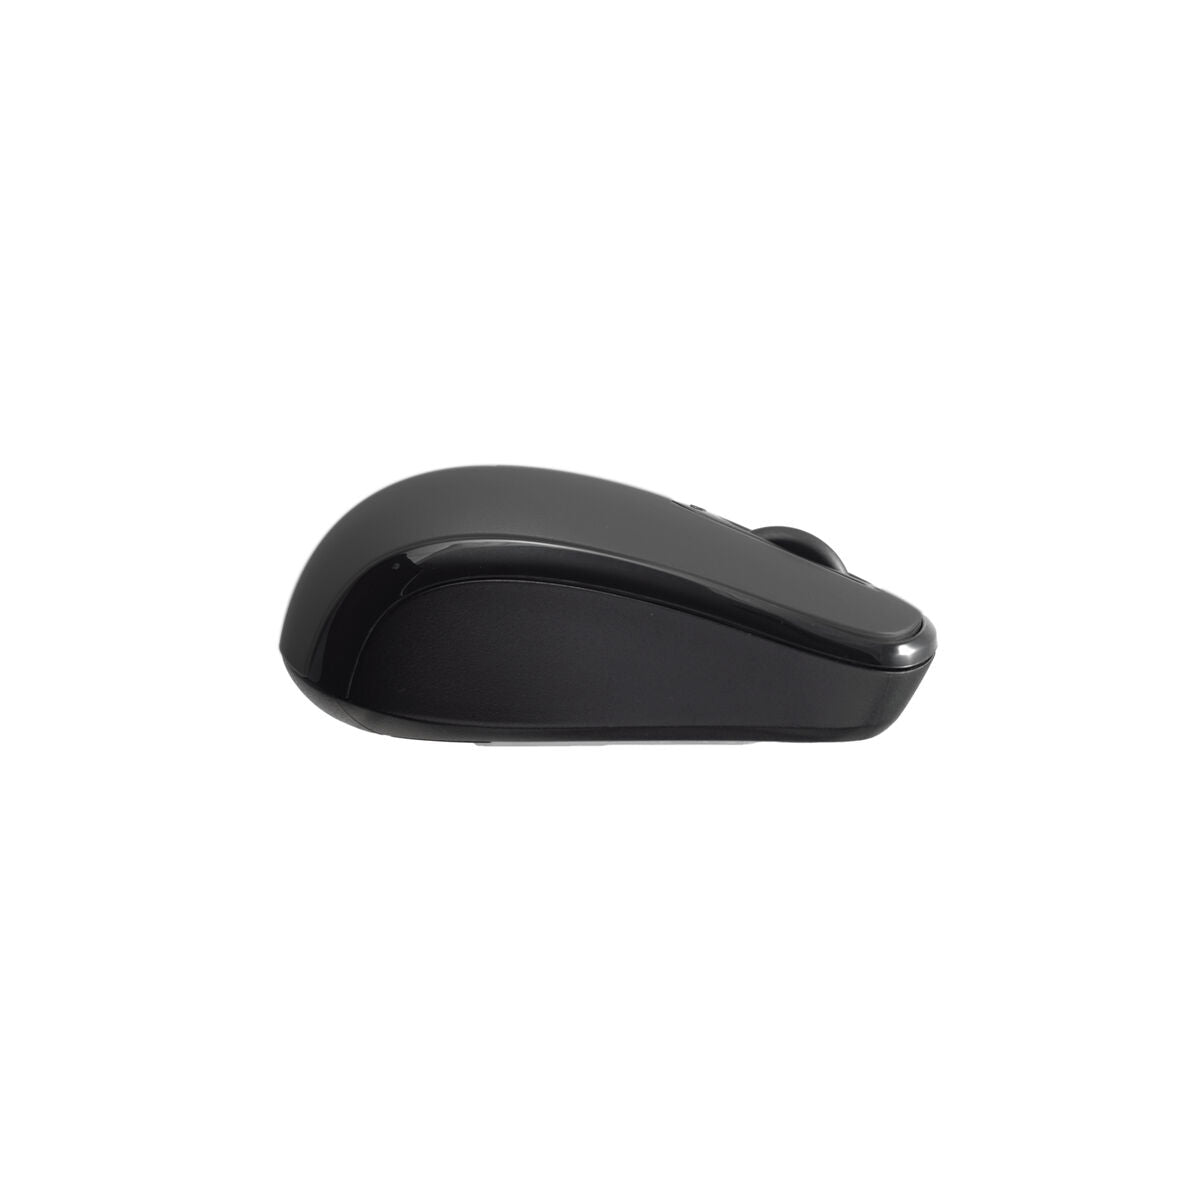 Wireless Mouse V7 MW150BT, V7, Computing, Accessories, wireless-mouse-v7-mw150bt, Brand_V7, category-reference-2609, category-reference-2642, category-reference-2656, category-reference-t-19685, category-reference-t-19908, category-reference-t-21353, computers / peripherals, Condition_NEW, office, Price_20 - 50, RiotNook